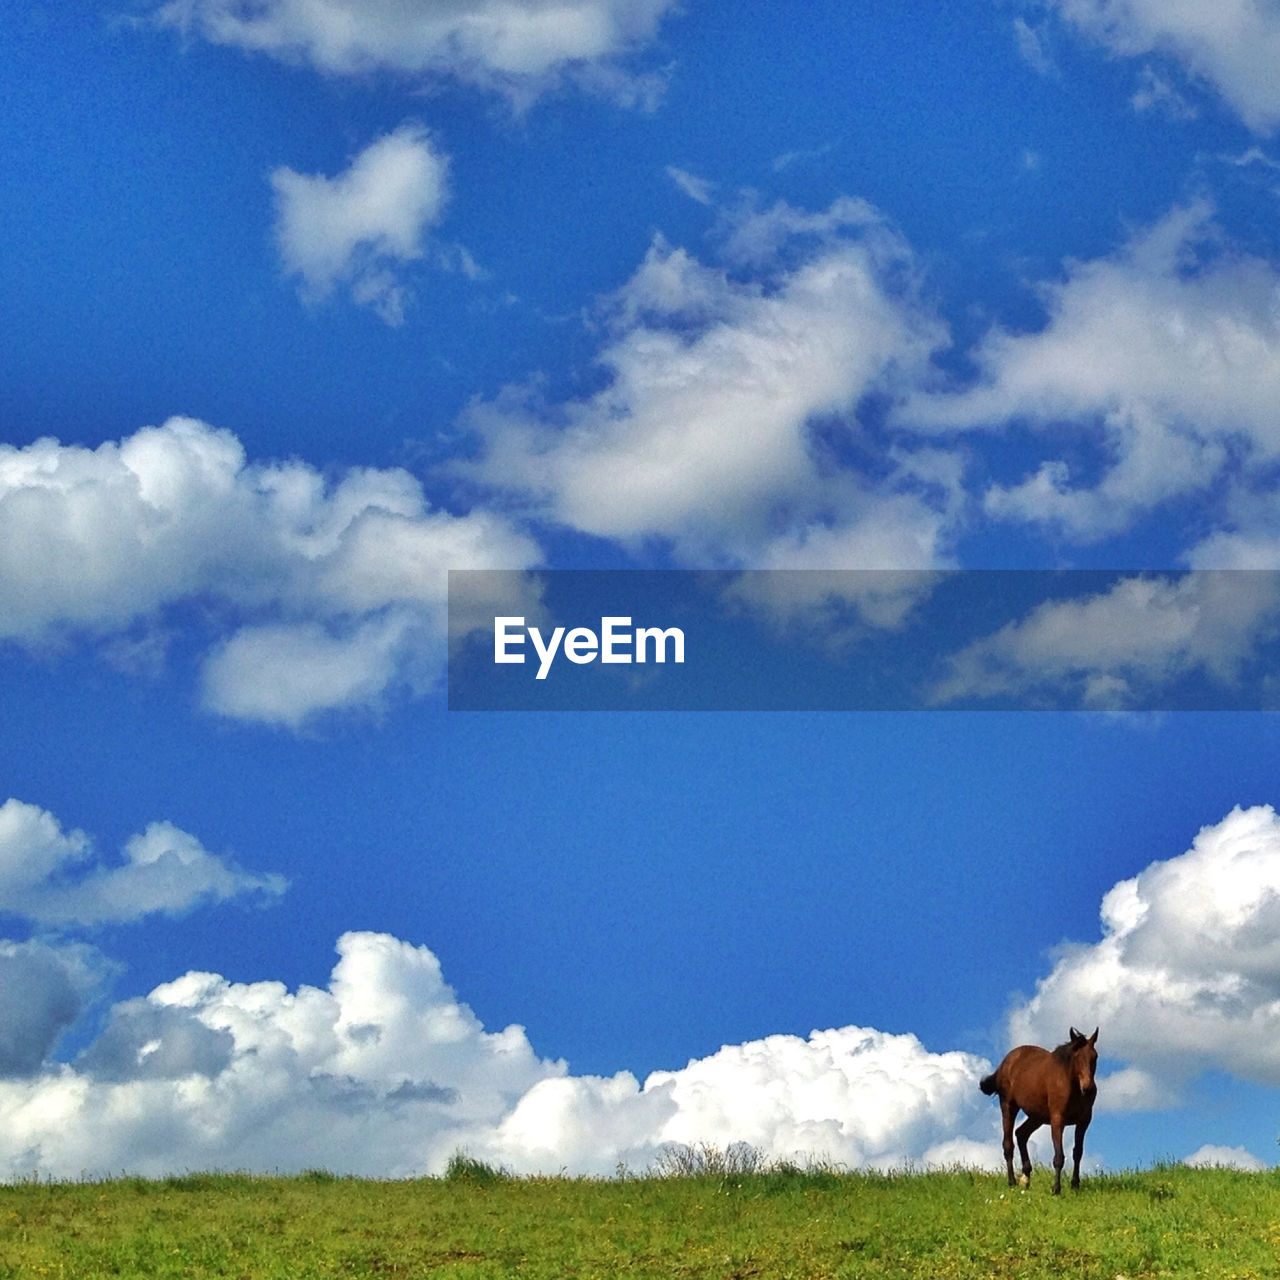 Horse on grassy field against cloudy sky